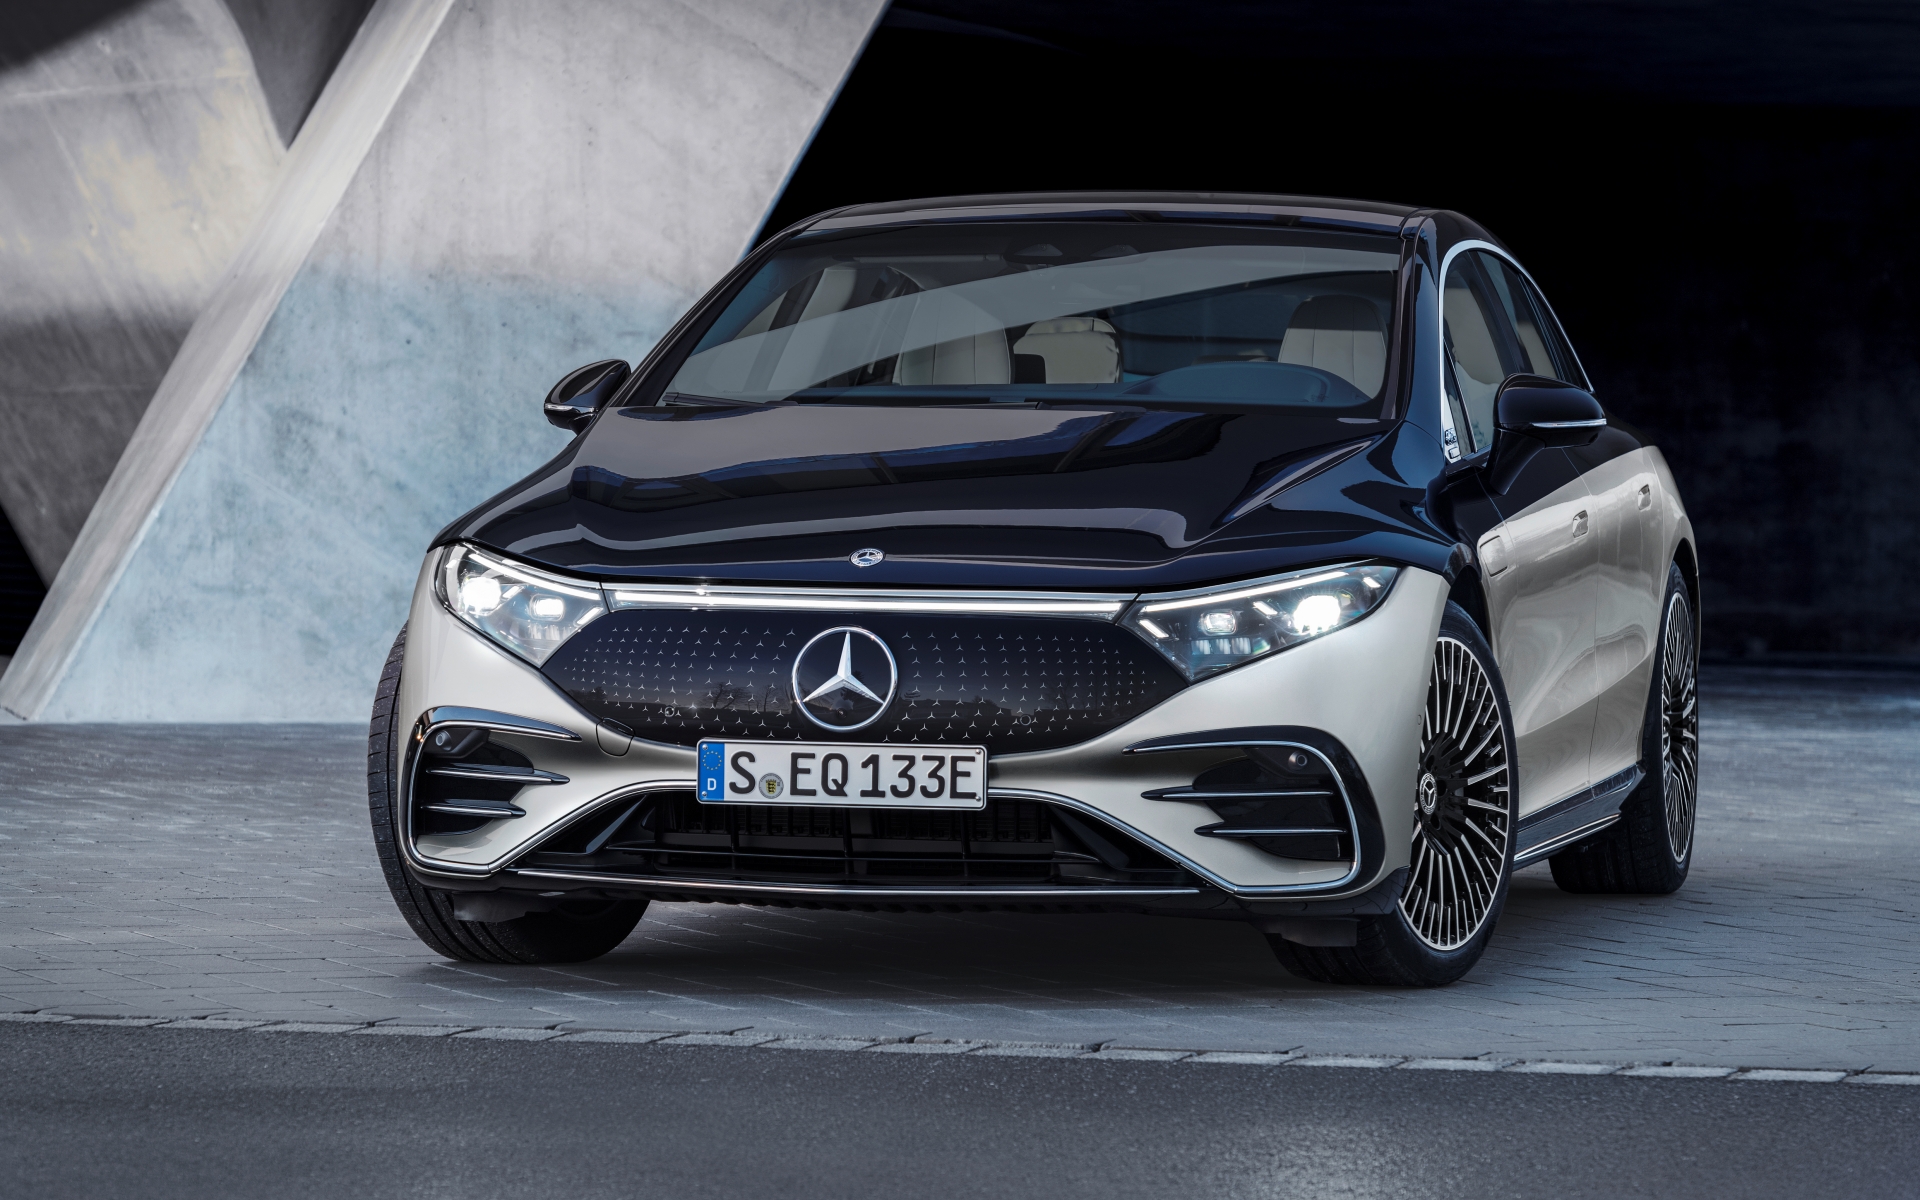 Mercedes-EQ, EQS 580 4MATIC, Exterieur, Farbe: hightechsilber/obsidianschwarz, AMG-Line, Edition 1;( Stromverbrauch kombiniert: 20,0-16,9 kWh/100 km; CO2-Emissionen kombiniert: 0 g/km);Stromverbrauch kombiniert: 20,0-16,9 kWh/100 km; CO2-Emissionen kombiniert: 0 g/km*Mercedes-EQ, EQS 580 4MATIC, Exterior, colour: high-tech silver/obsidian black, AMG-Line, Edition 1; (combined electrical consumption: 20.0-16.9 kWh/100 km; combined CO2 emissions: 0 g/km);Combined electrical consumption: 20.0-16.9 kWh/100 km; combined CO2 emissions: 0 g/km